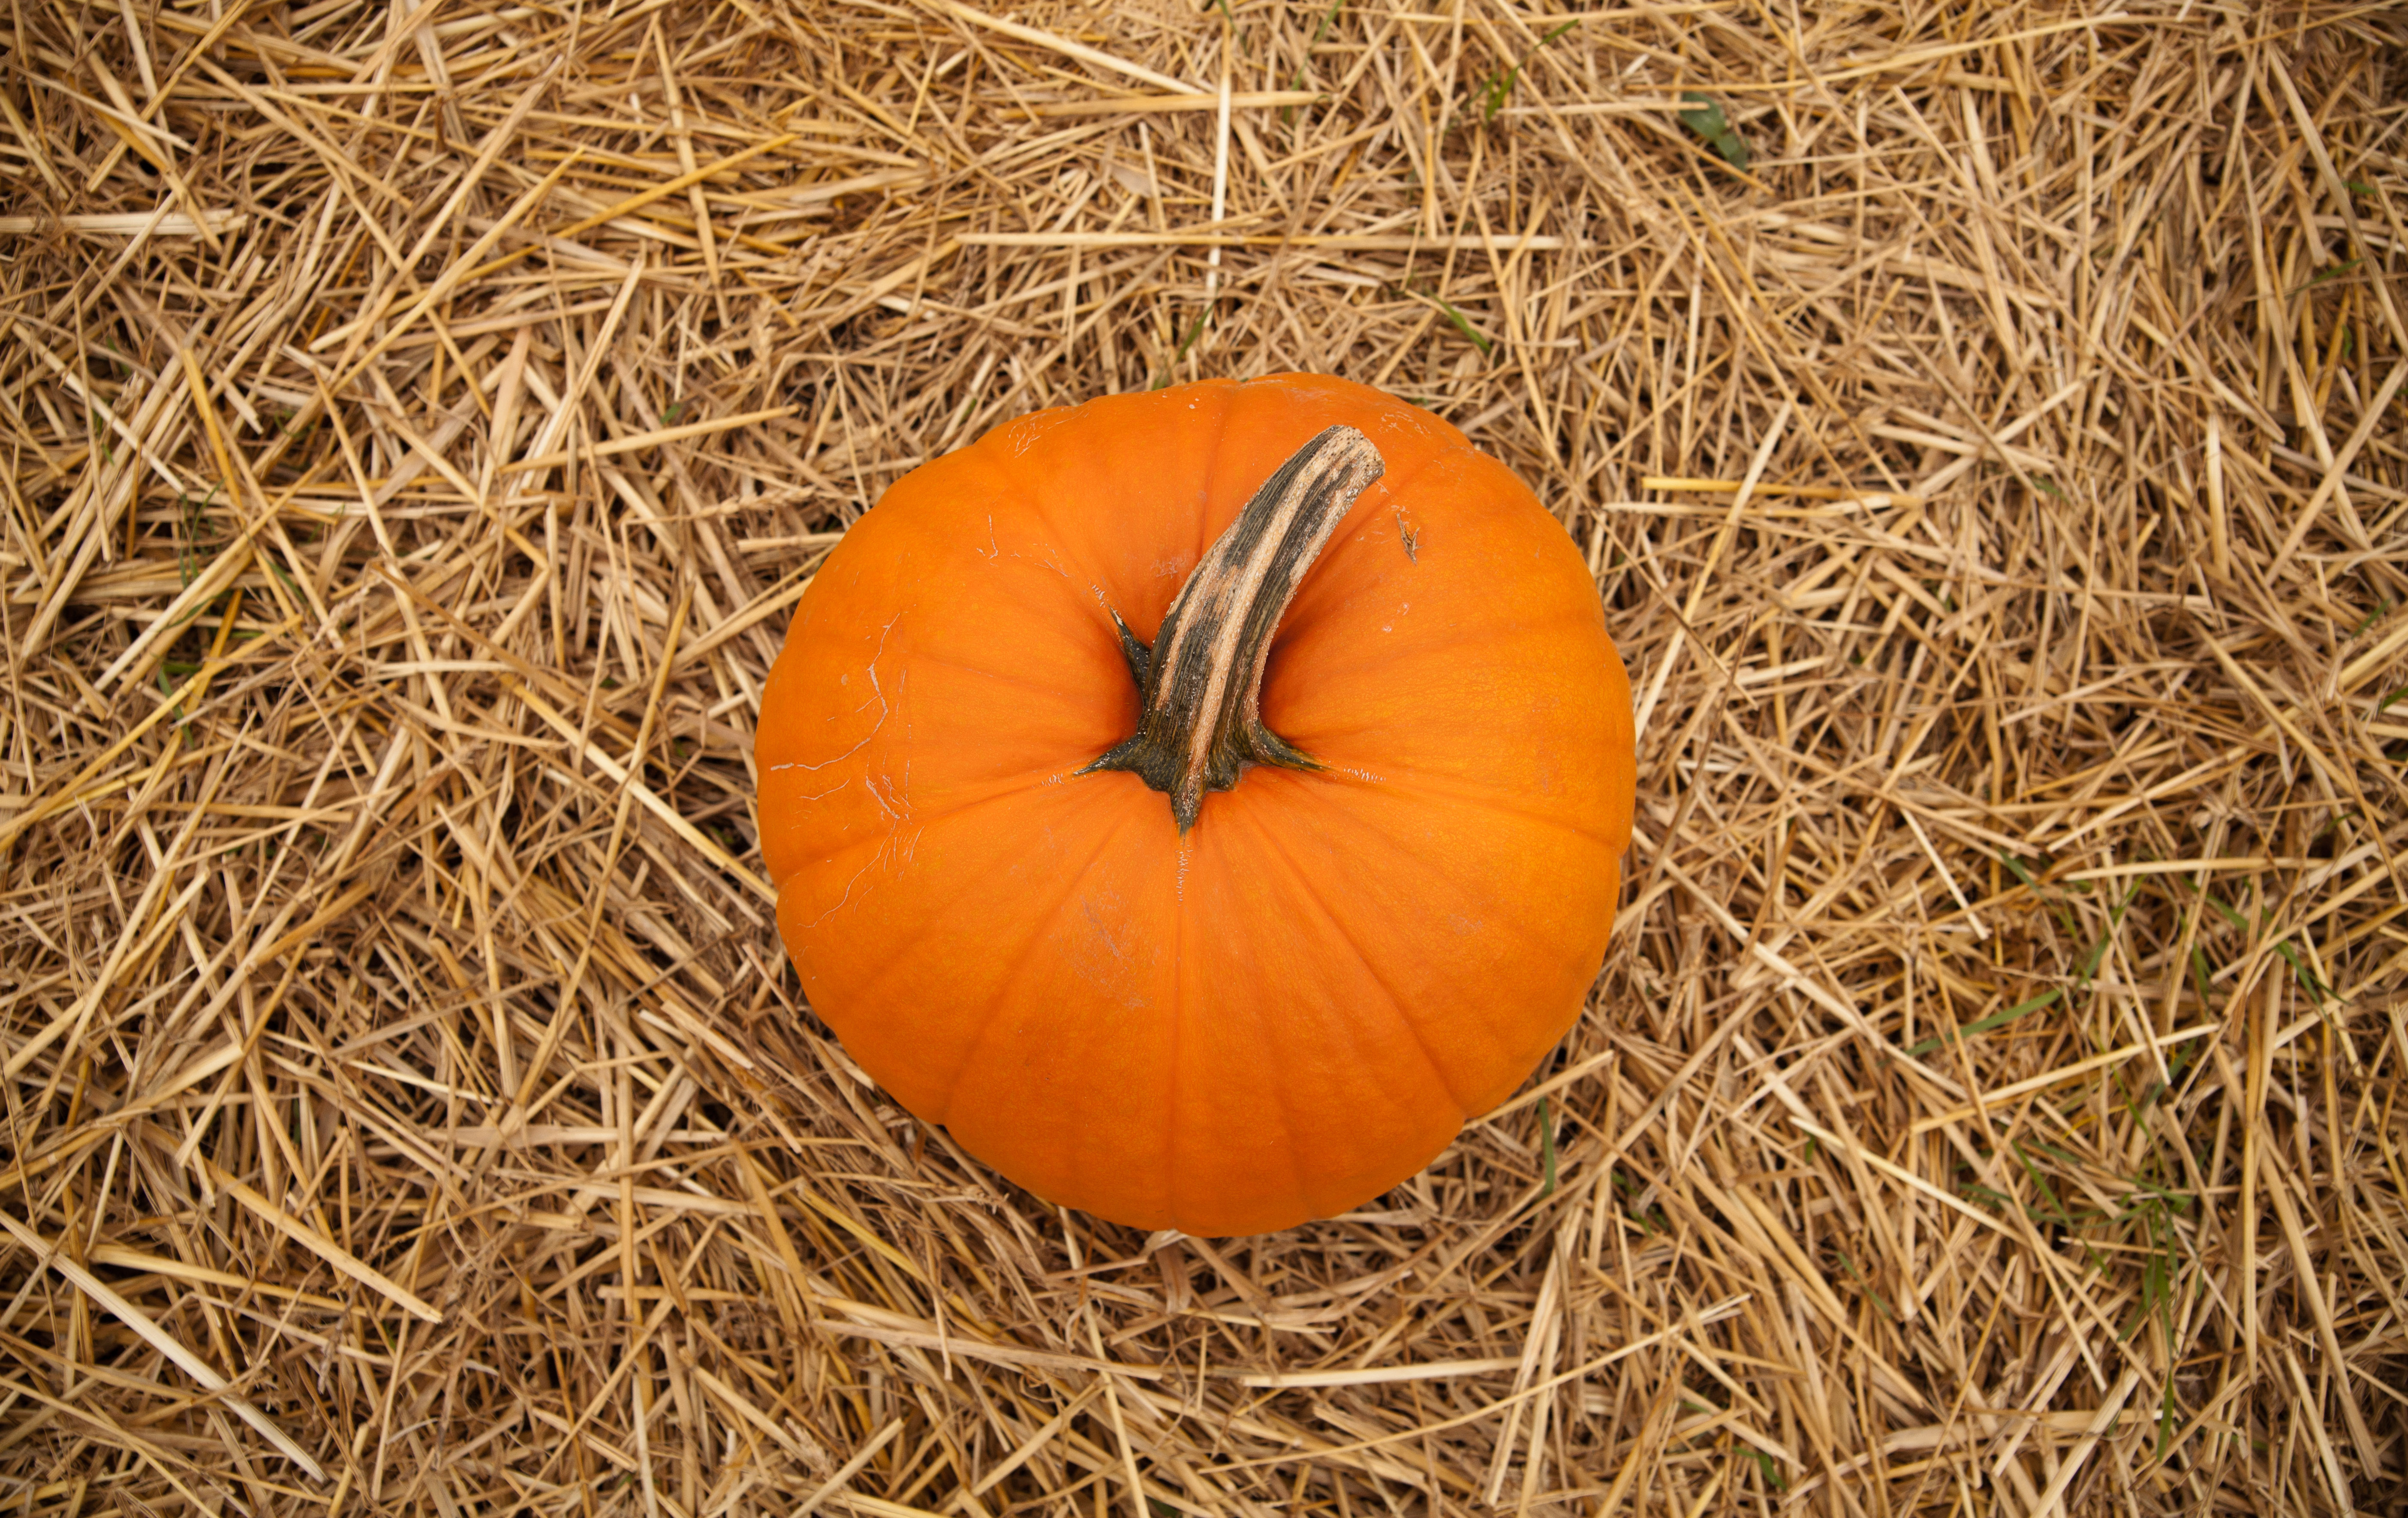 Pumpkins – More than just decorations – Home & Family